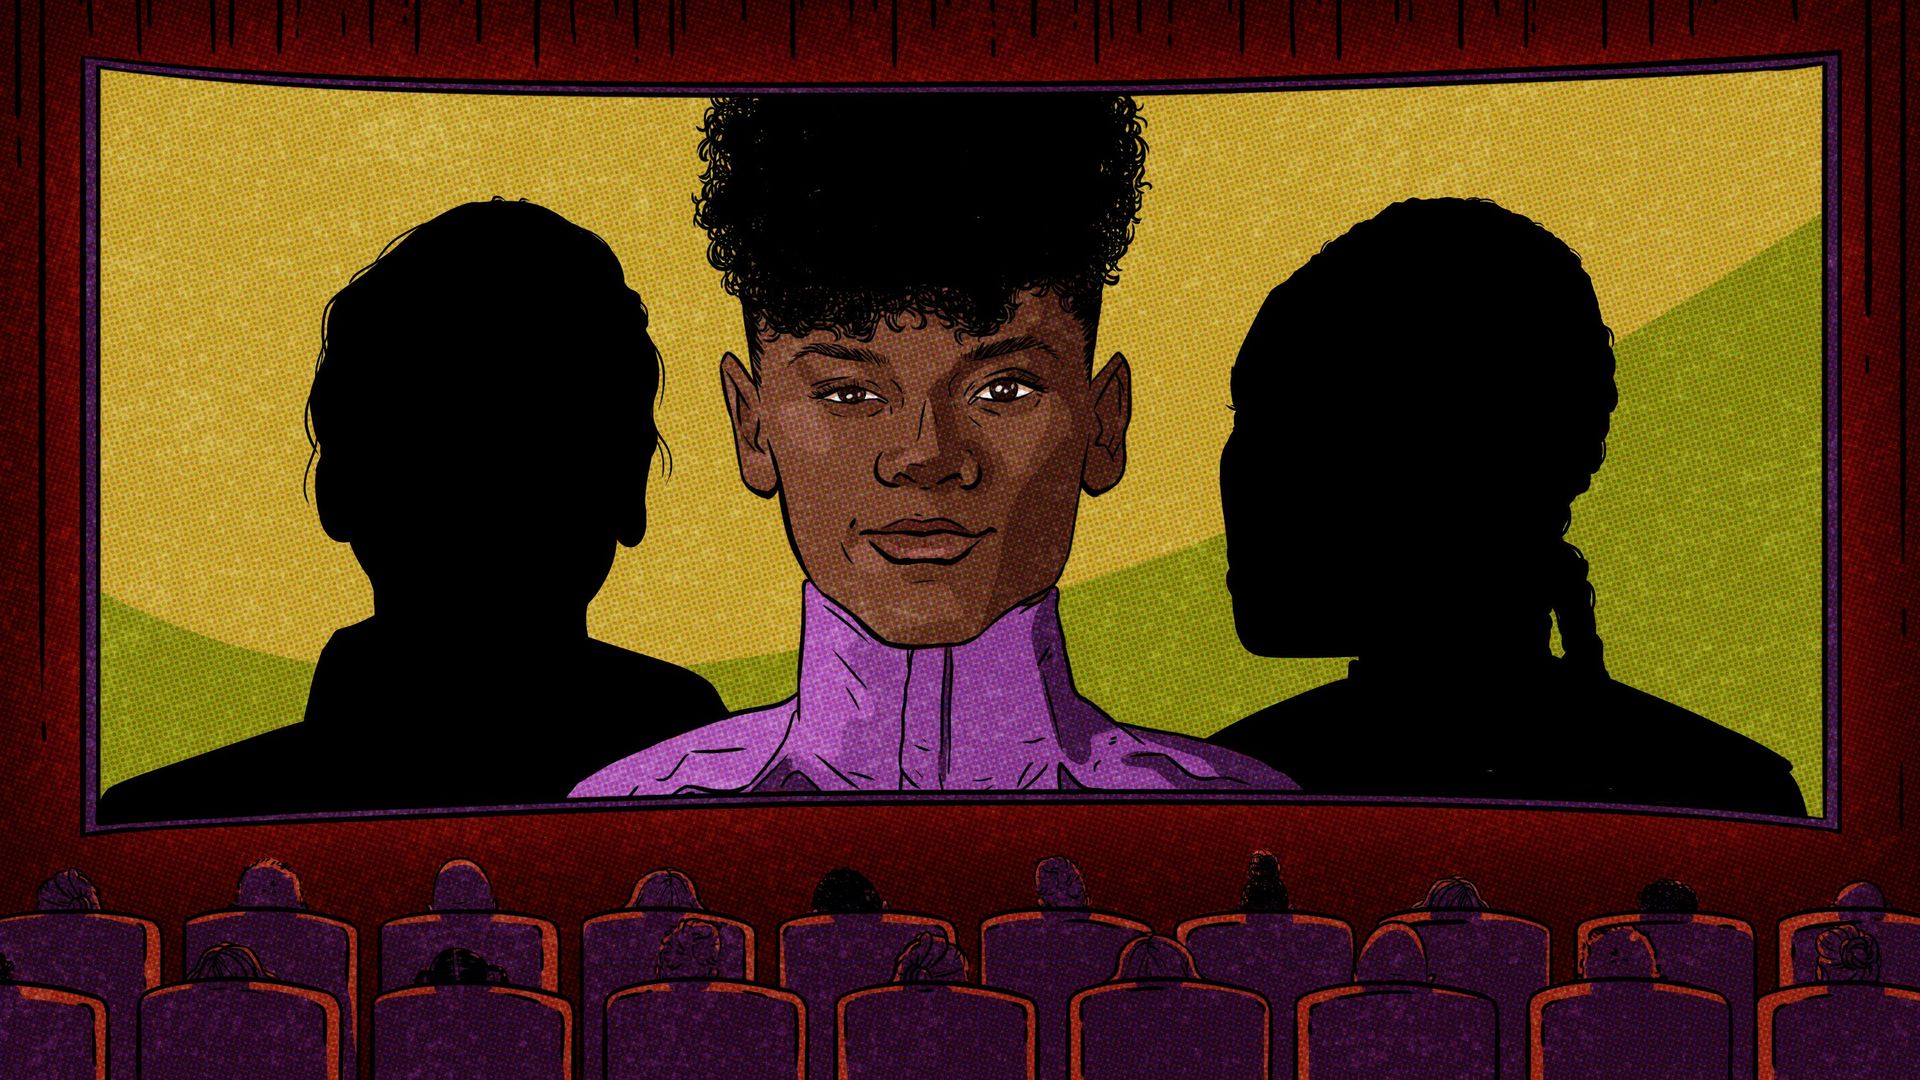 Illustration of Letitia Wright as Shuri on a theater screen, flanked by silhouettes. 